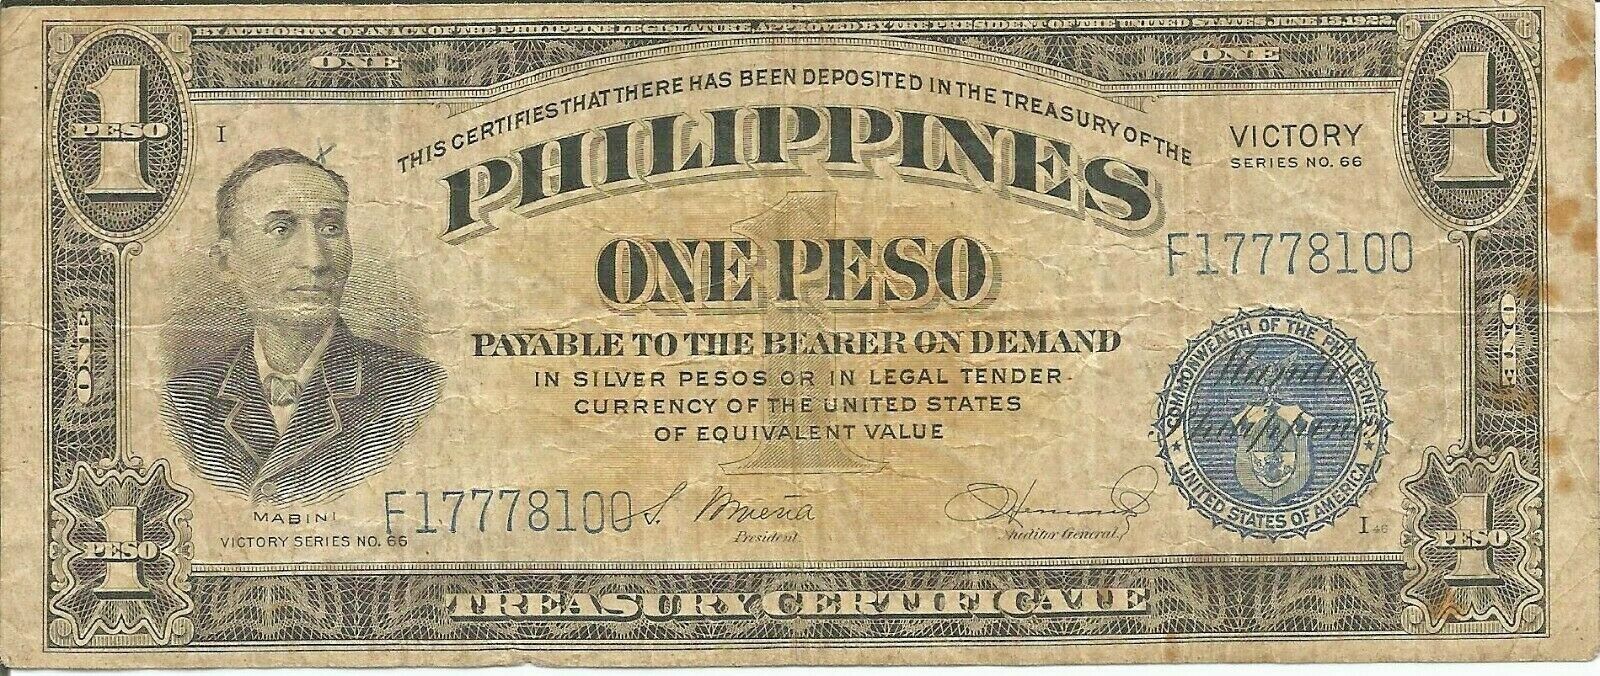 Philippines One Peso Victory Series No. 66 Banknote-ww2 # 16